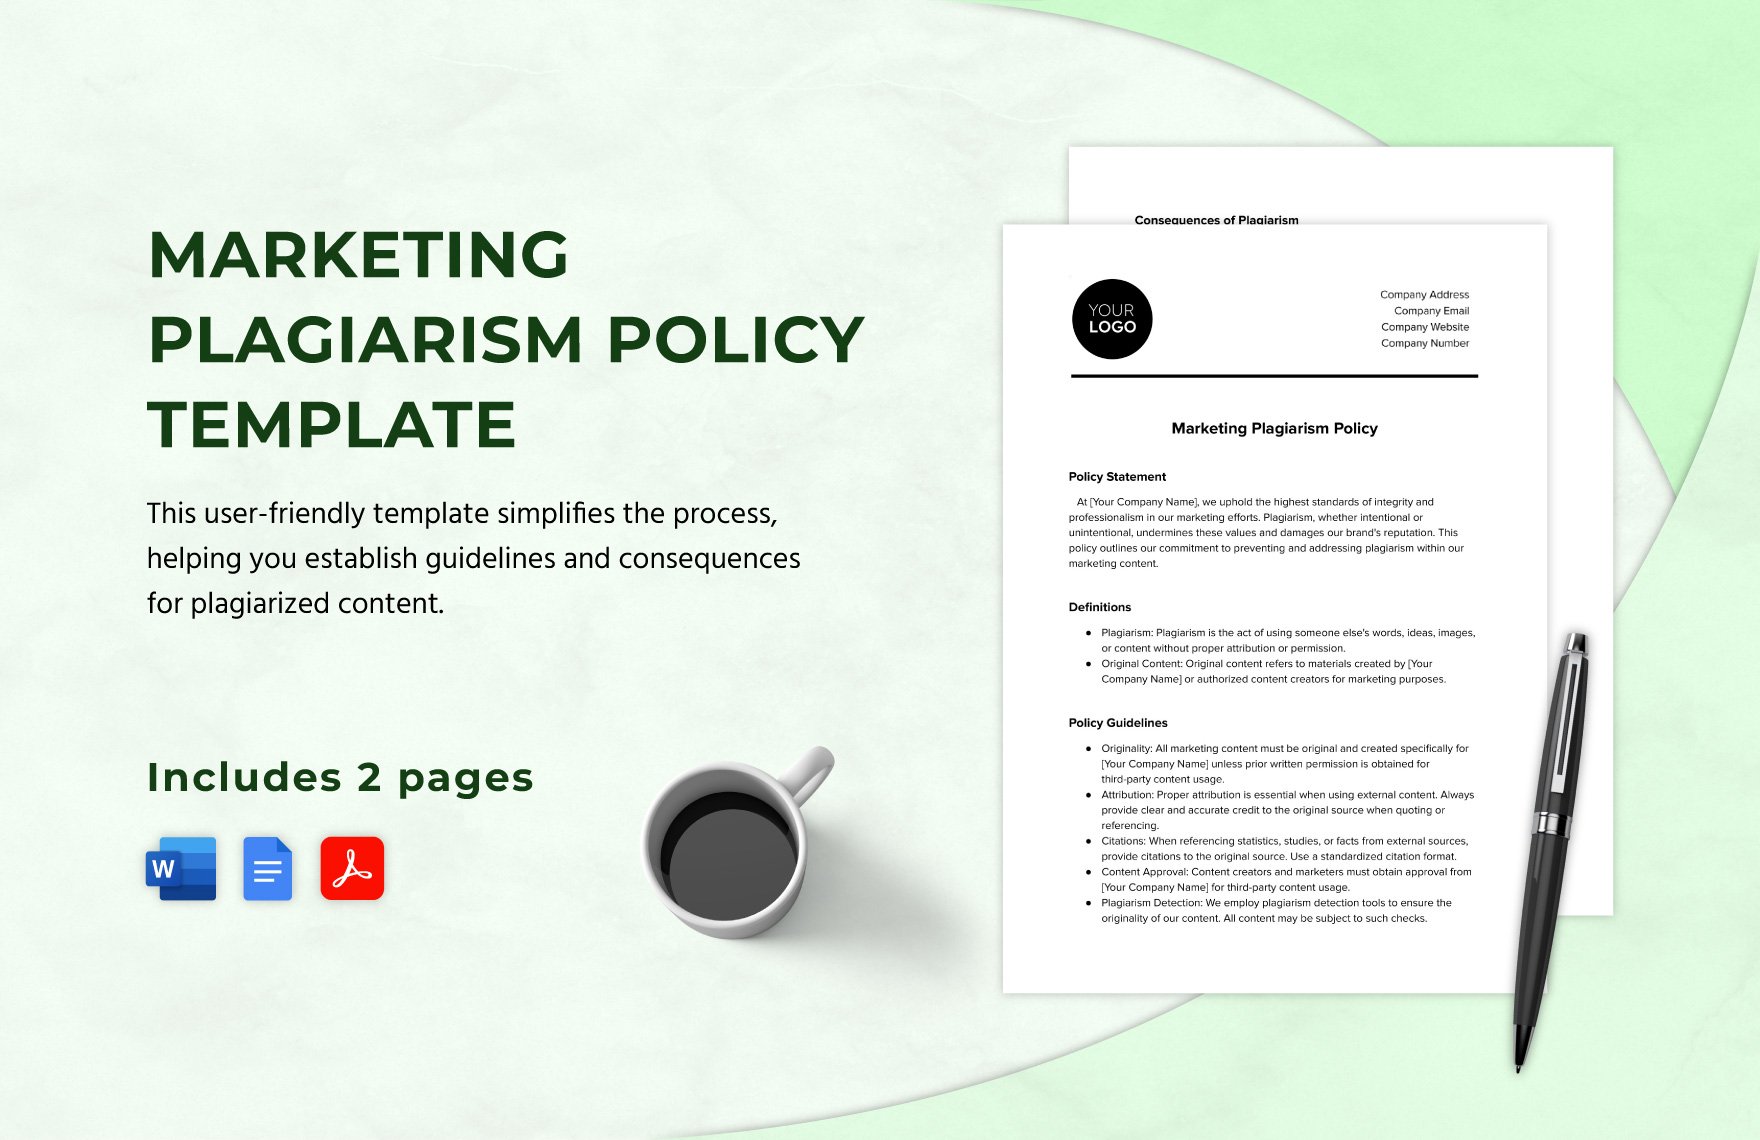 Marketing Plagiarism Policy Template in Word, Google Docs, PDF